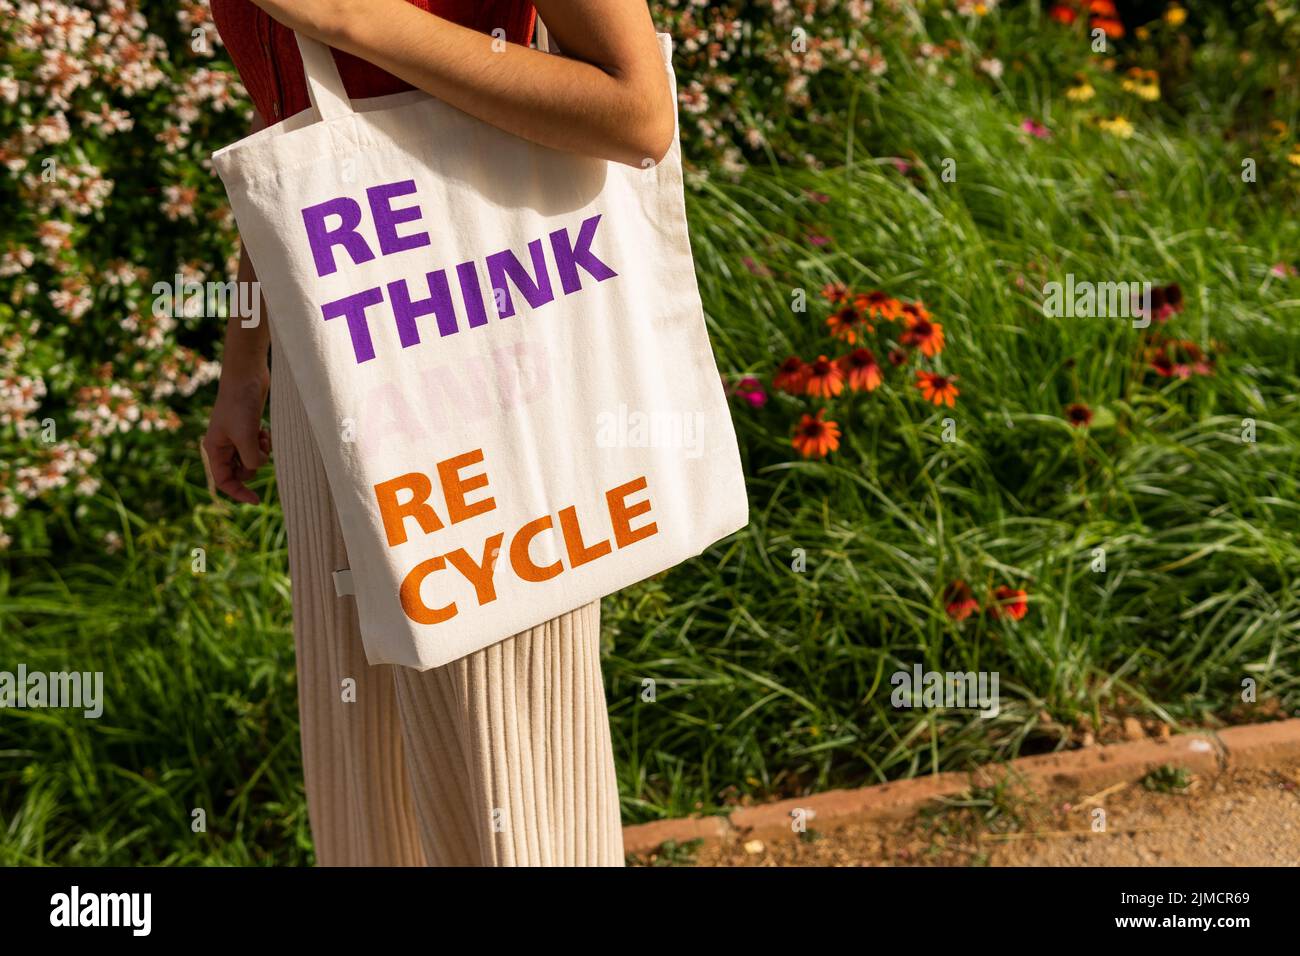 Anonymous female carrying ECO friendly fabric bag with Rethink Recycle inscription while standing near blooming bushes on street Stock Photo